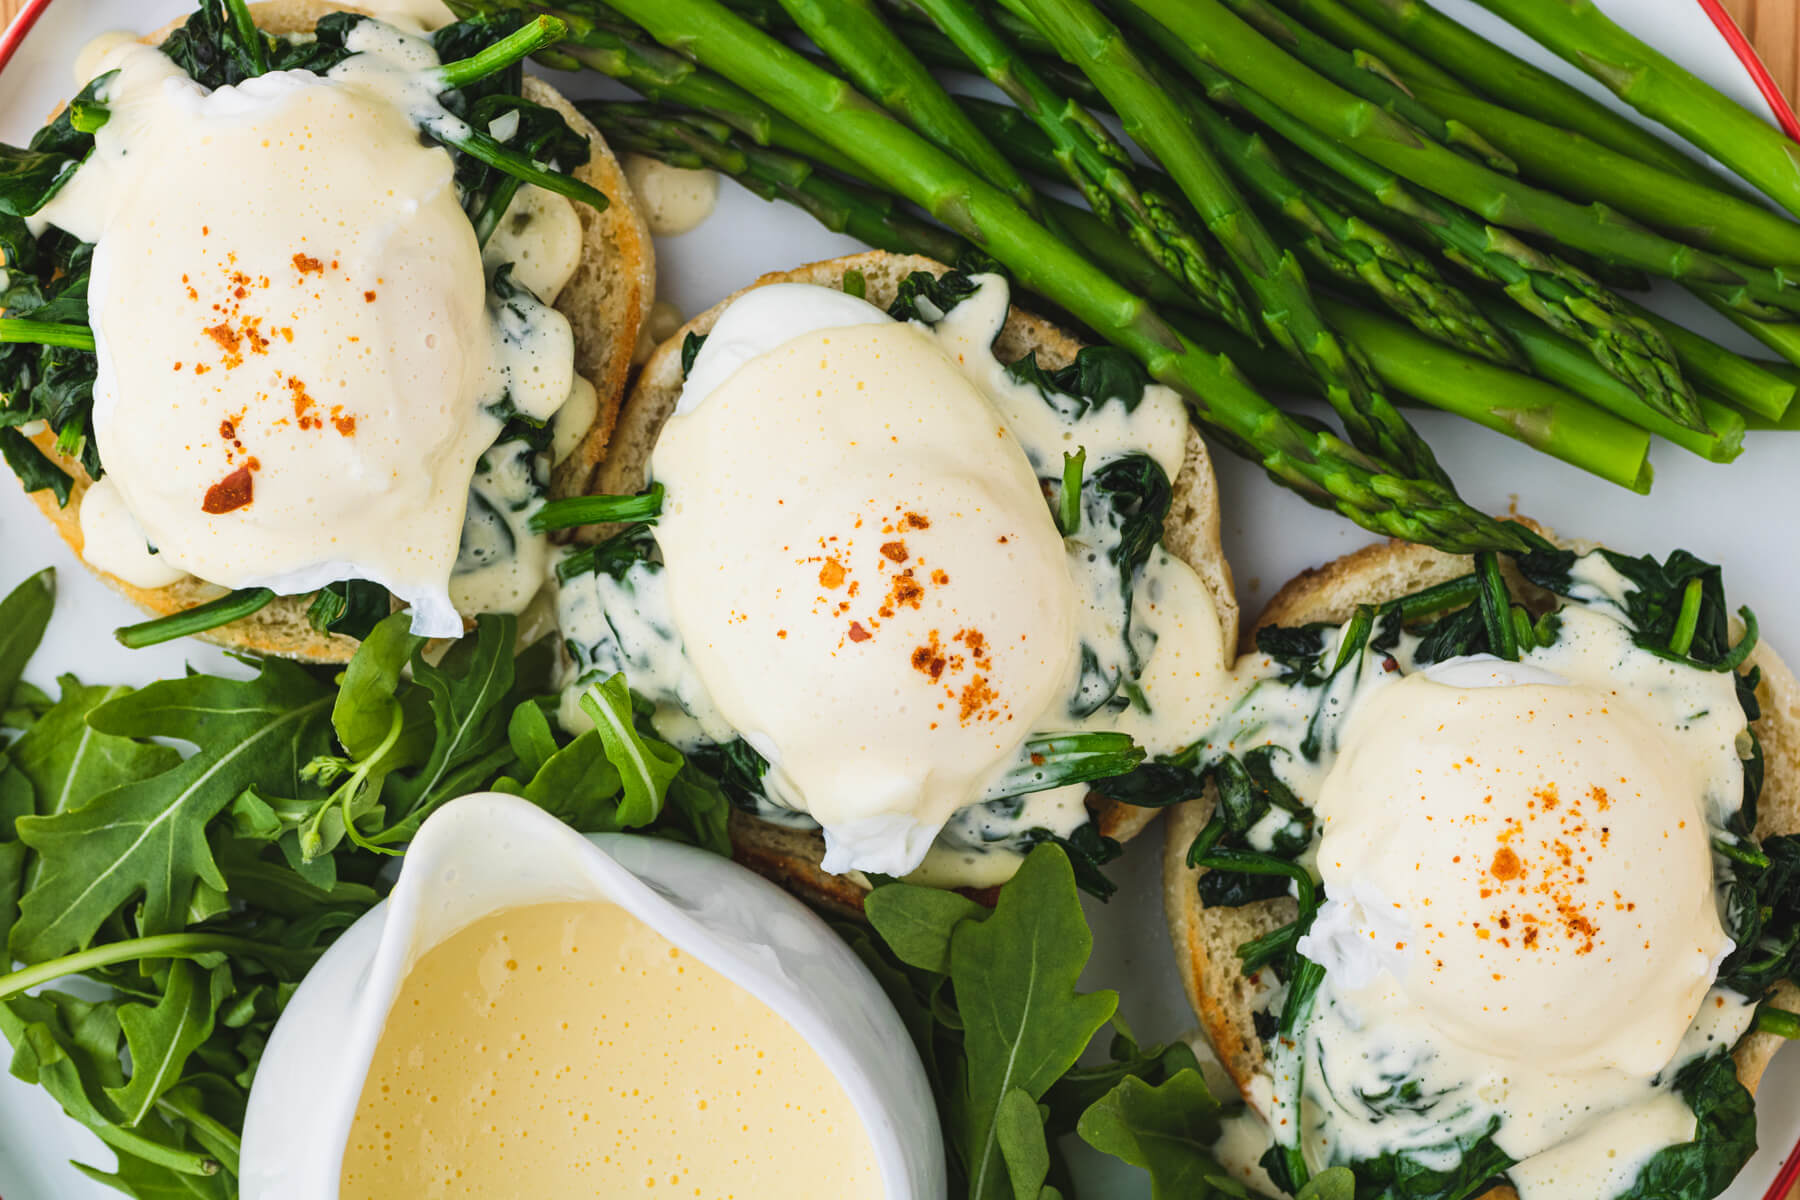 Three Eggs Benedict Florentines surrounded by verdant green asparagus and baby arugula with a pitcher of creamy yellow hollandaise.